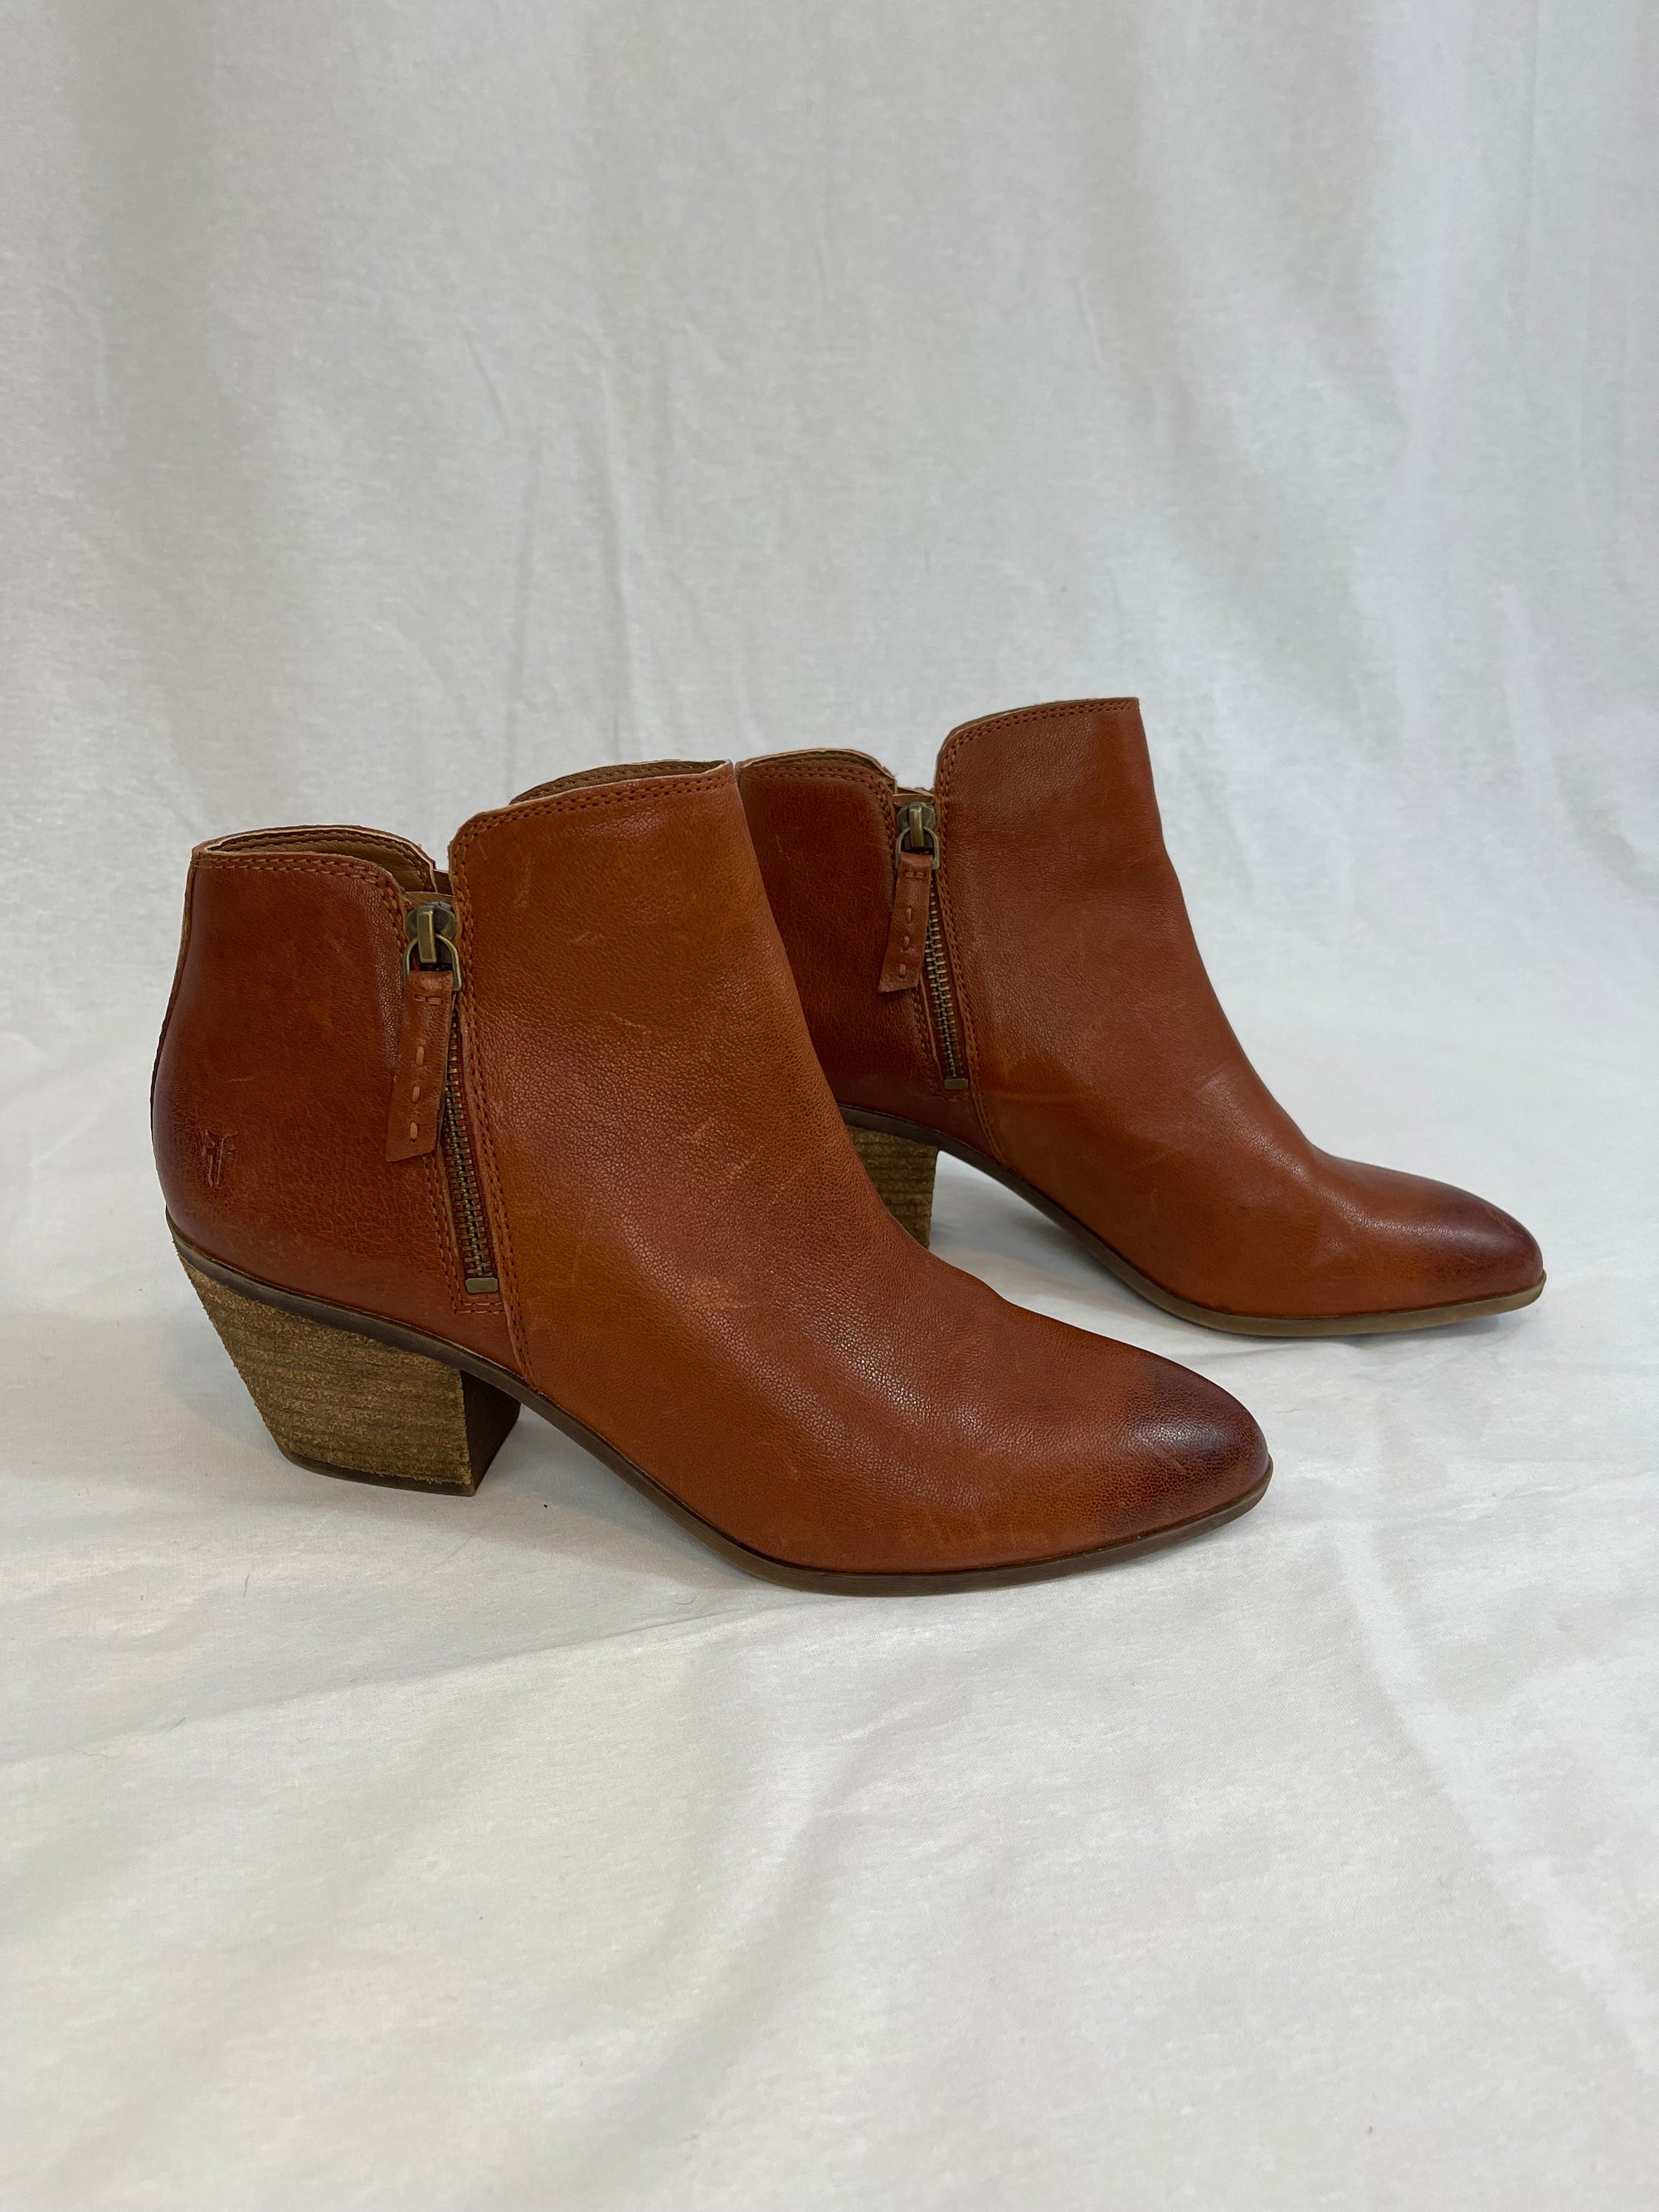 Frye Judith Ankle Boot size 8.5